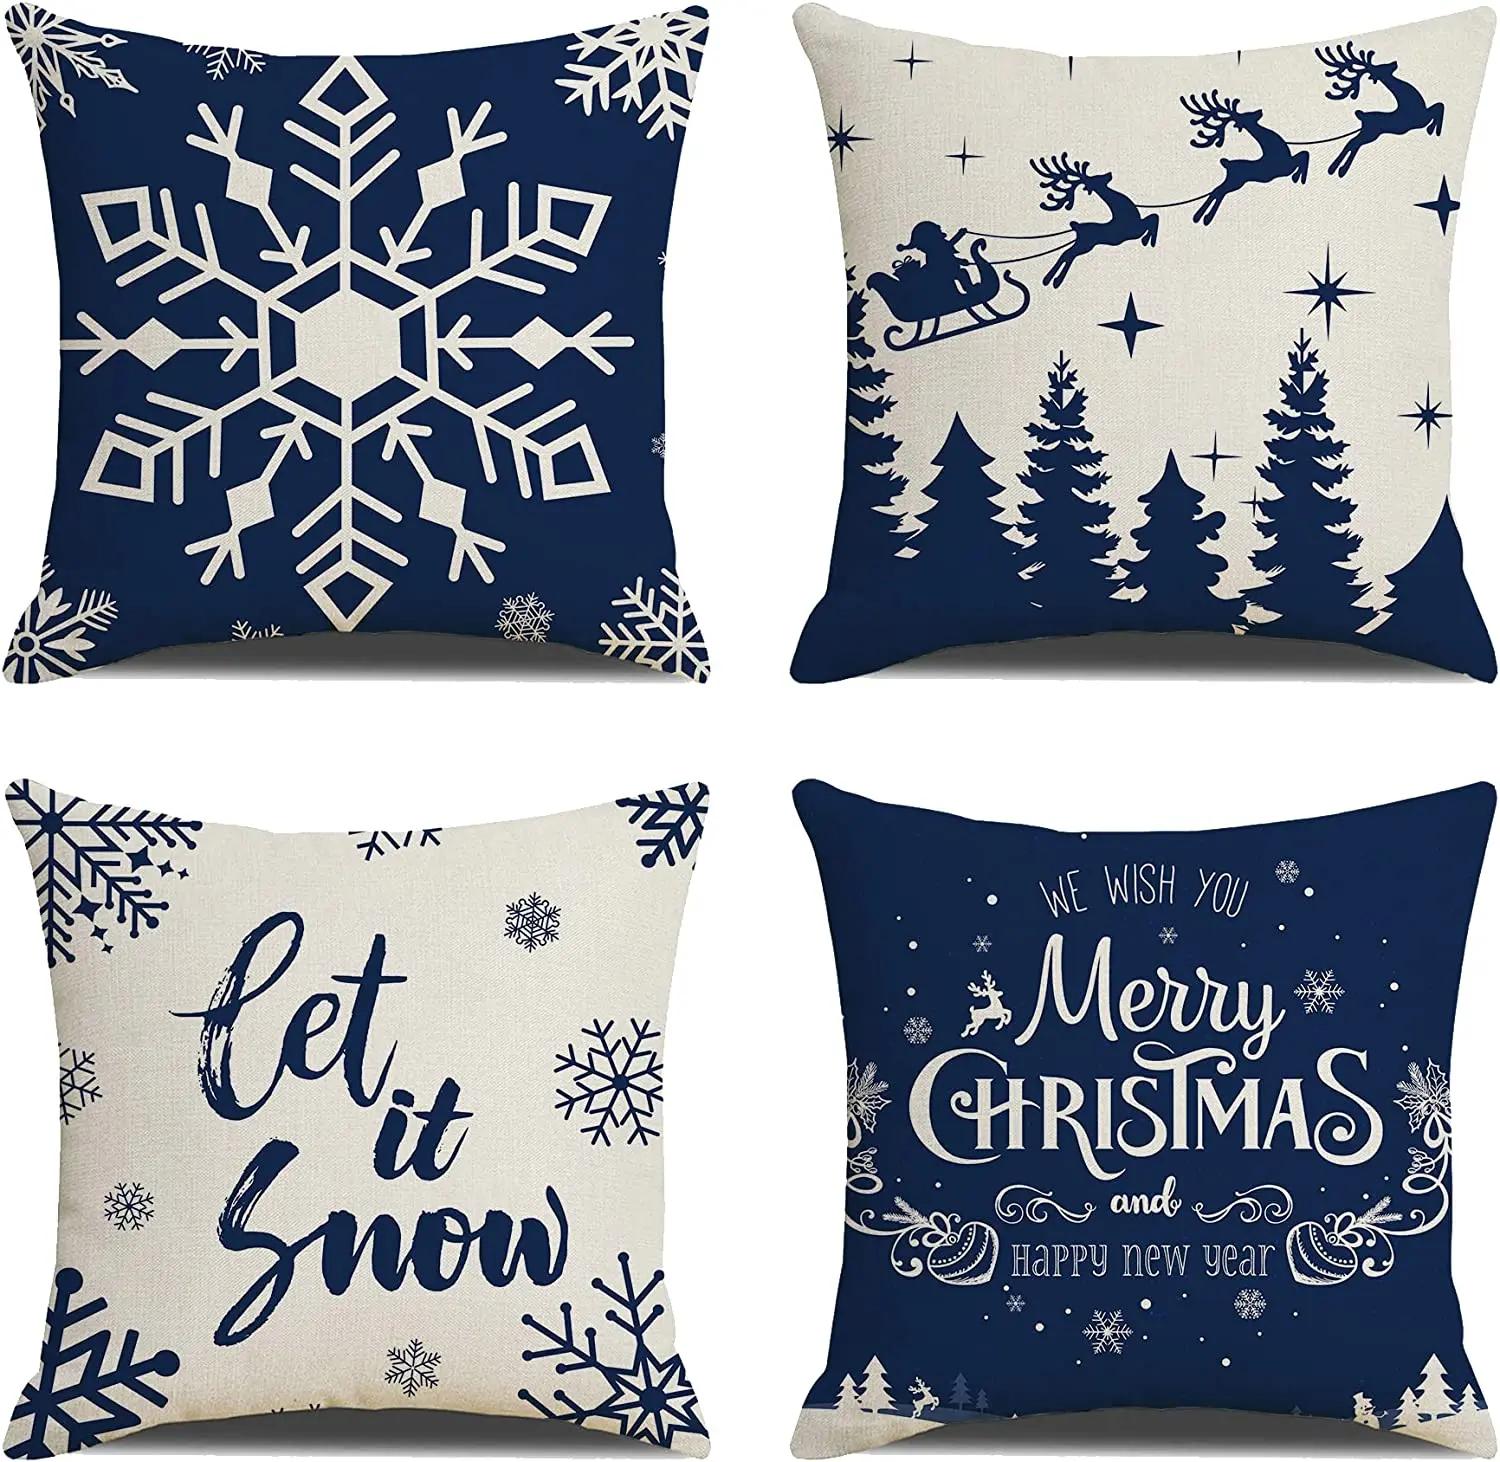 Christmas Throw Pillow Covers 18x18 inch Set of 4 Decorative Farmhouse Pillow Cases Merry Christmas Let it Snow Xmas